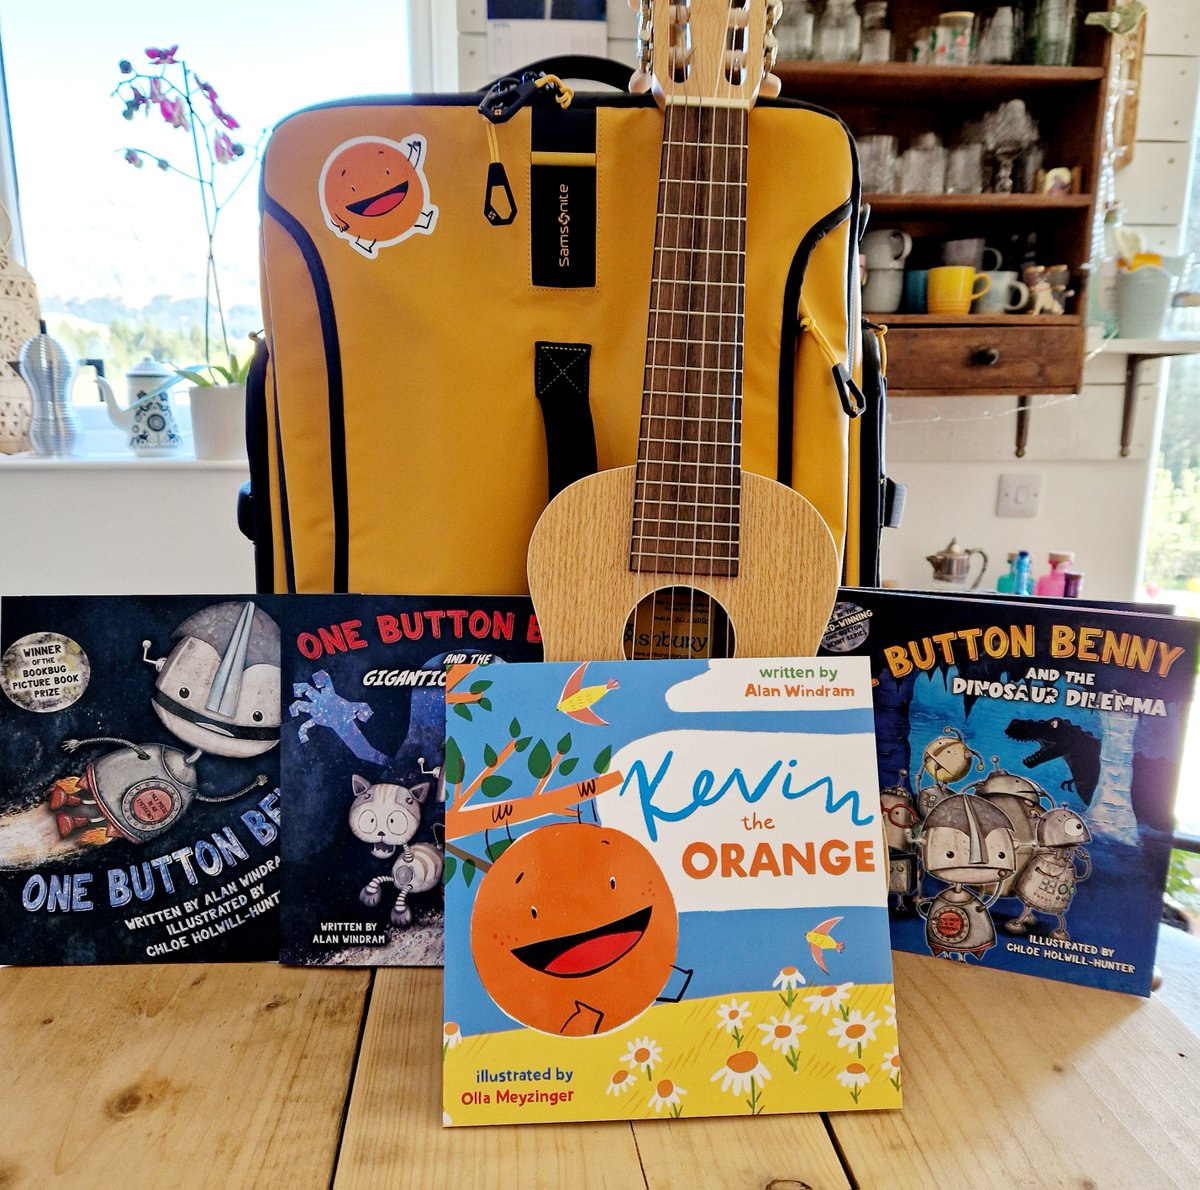 It's #AlanOnTheRoad time as I head off for @BookPaisley with schools events tomorrow and a #Soldout Family Day event on Saturday. #OneButtonBenny #KevinTheOrange and I can't wait to wait to meet loads of children and families for #stories #songs and #dancing 📚🤖🍊#pbf24